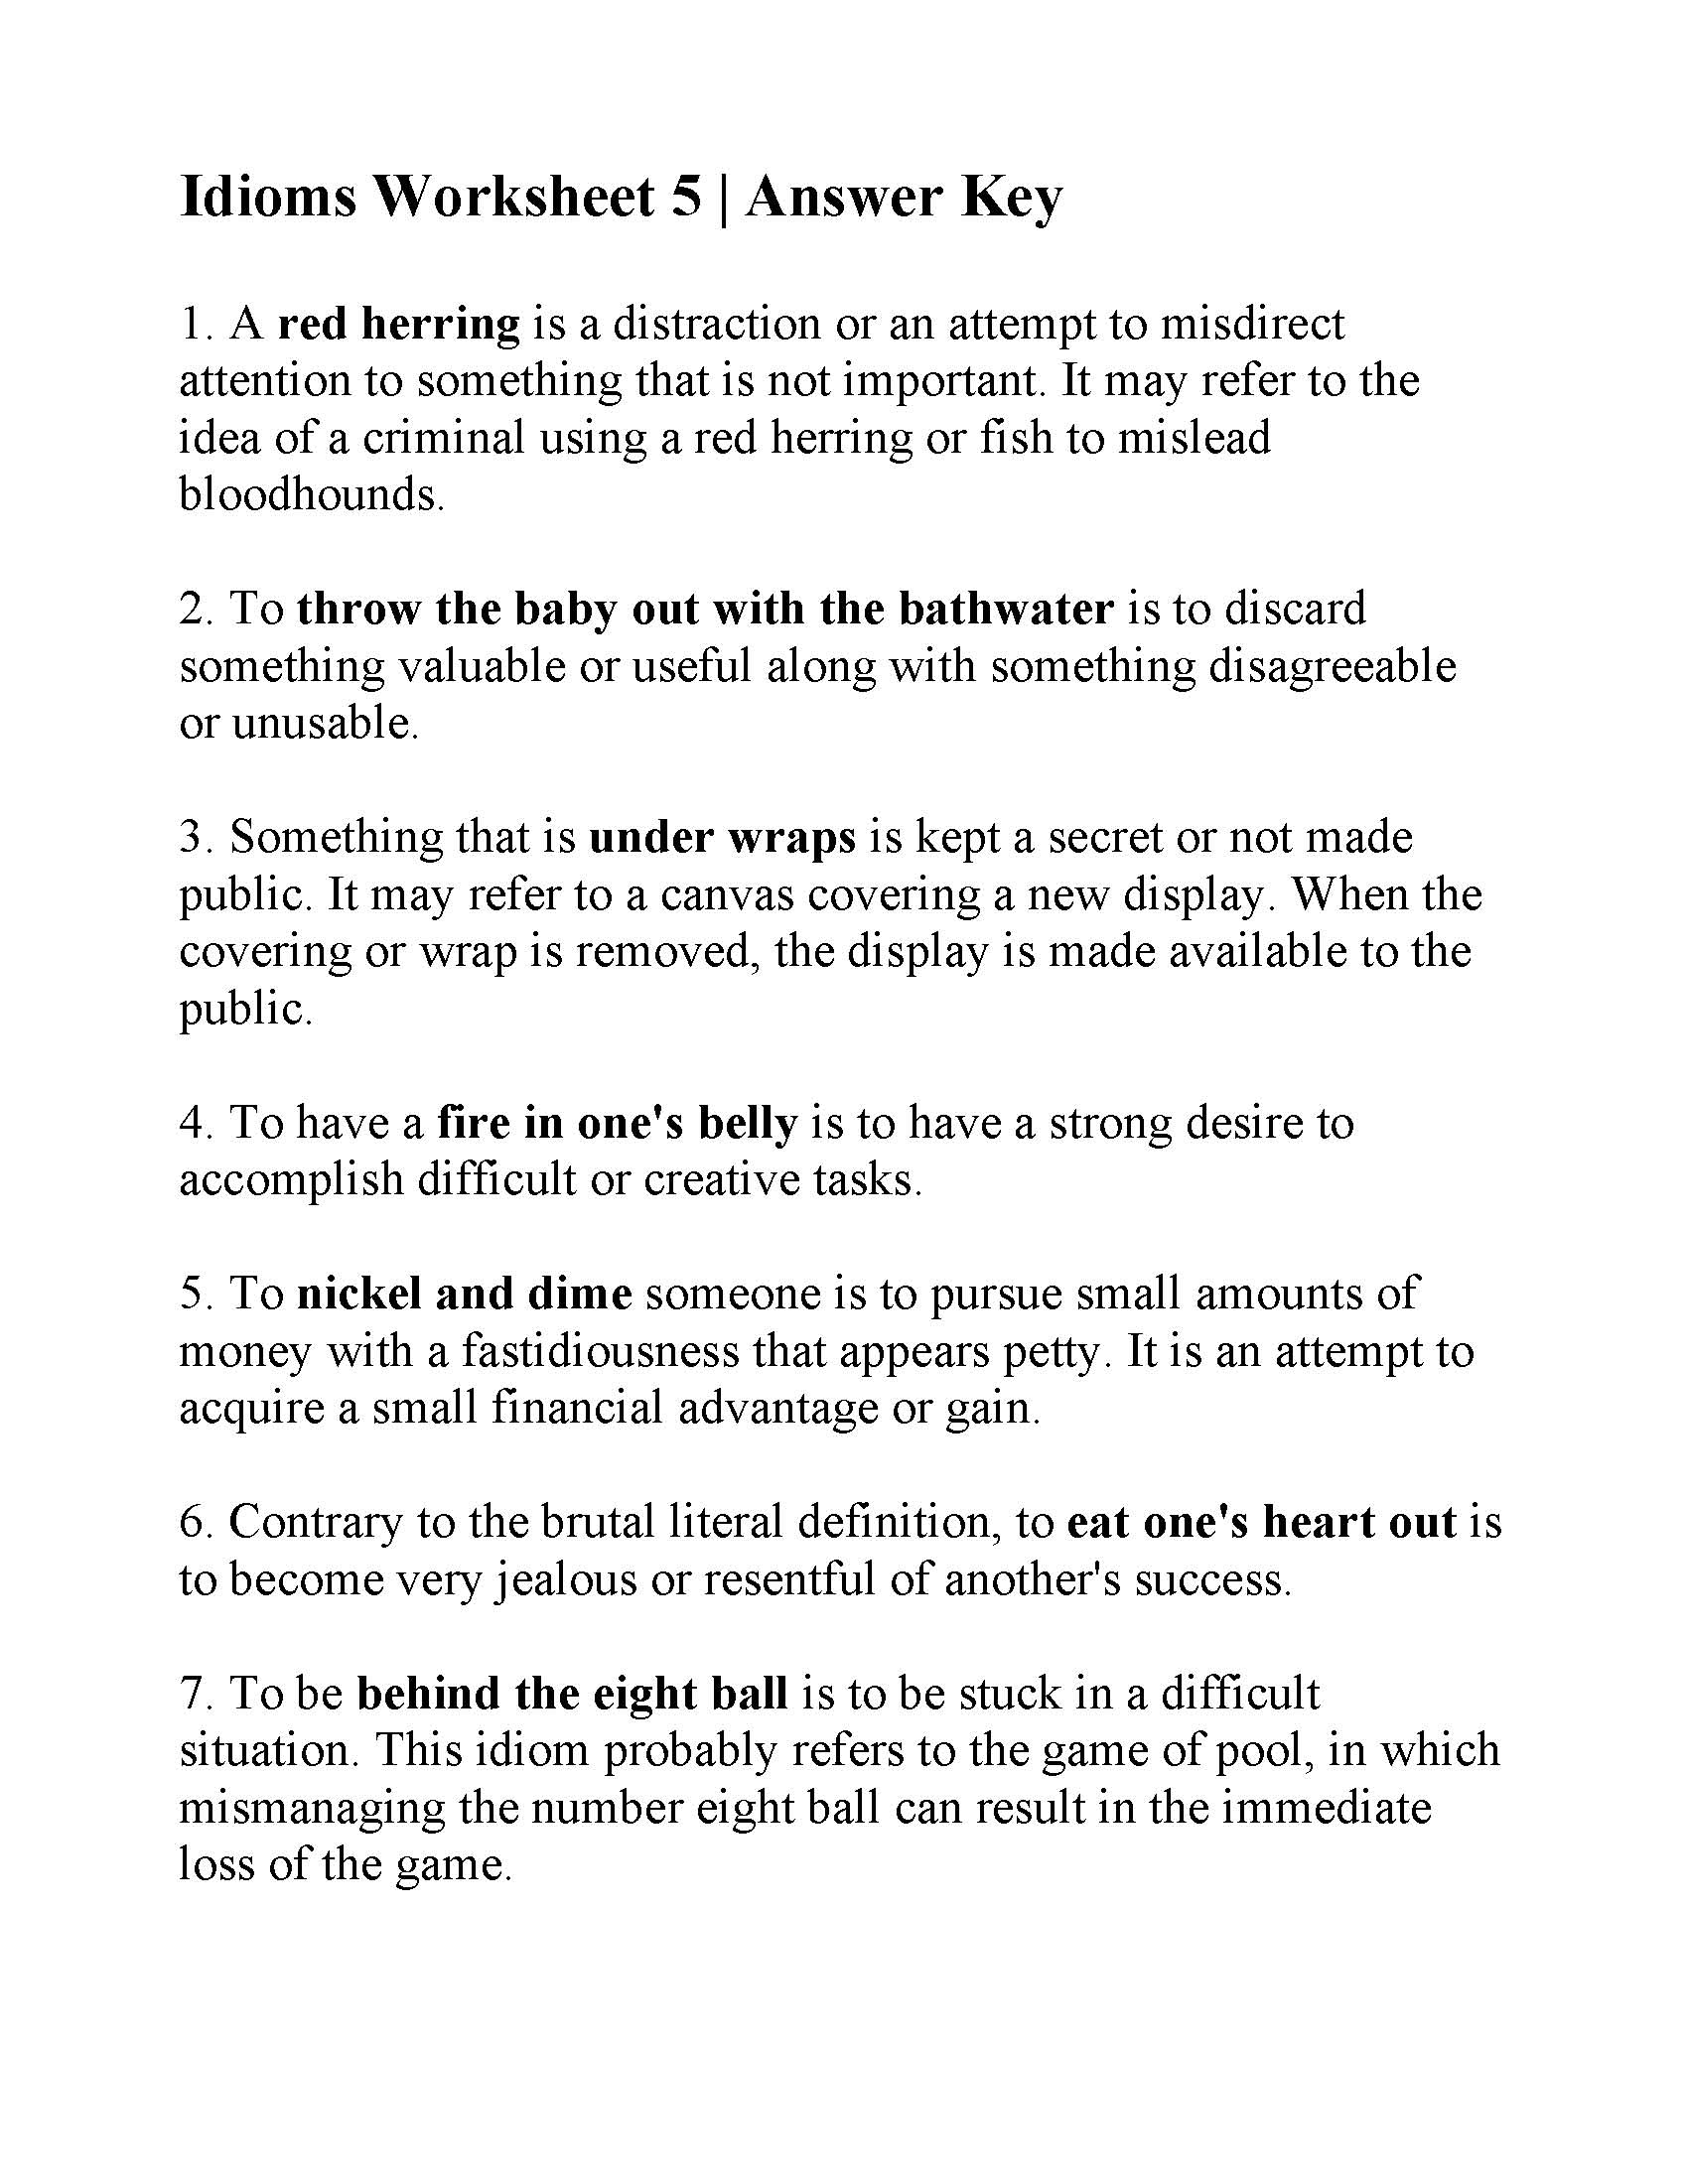 This is a preview image of Idiom Worksheet 5. Click on it to enlarge it or view the source file.